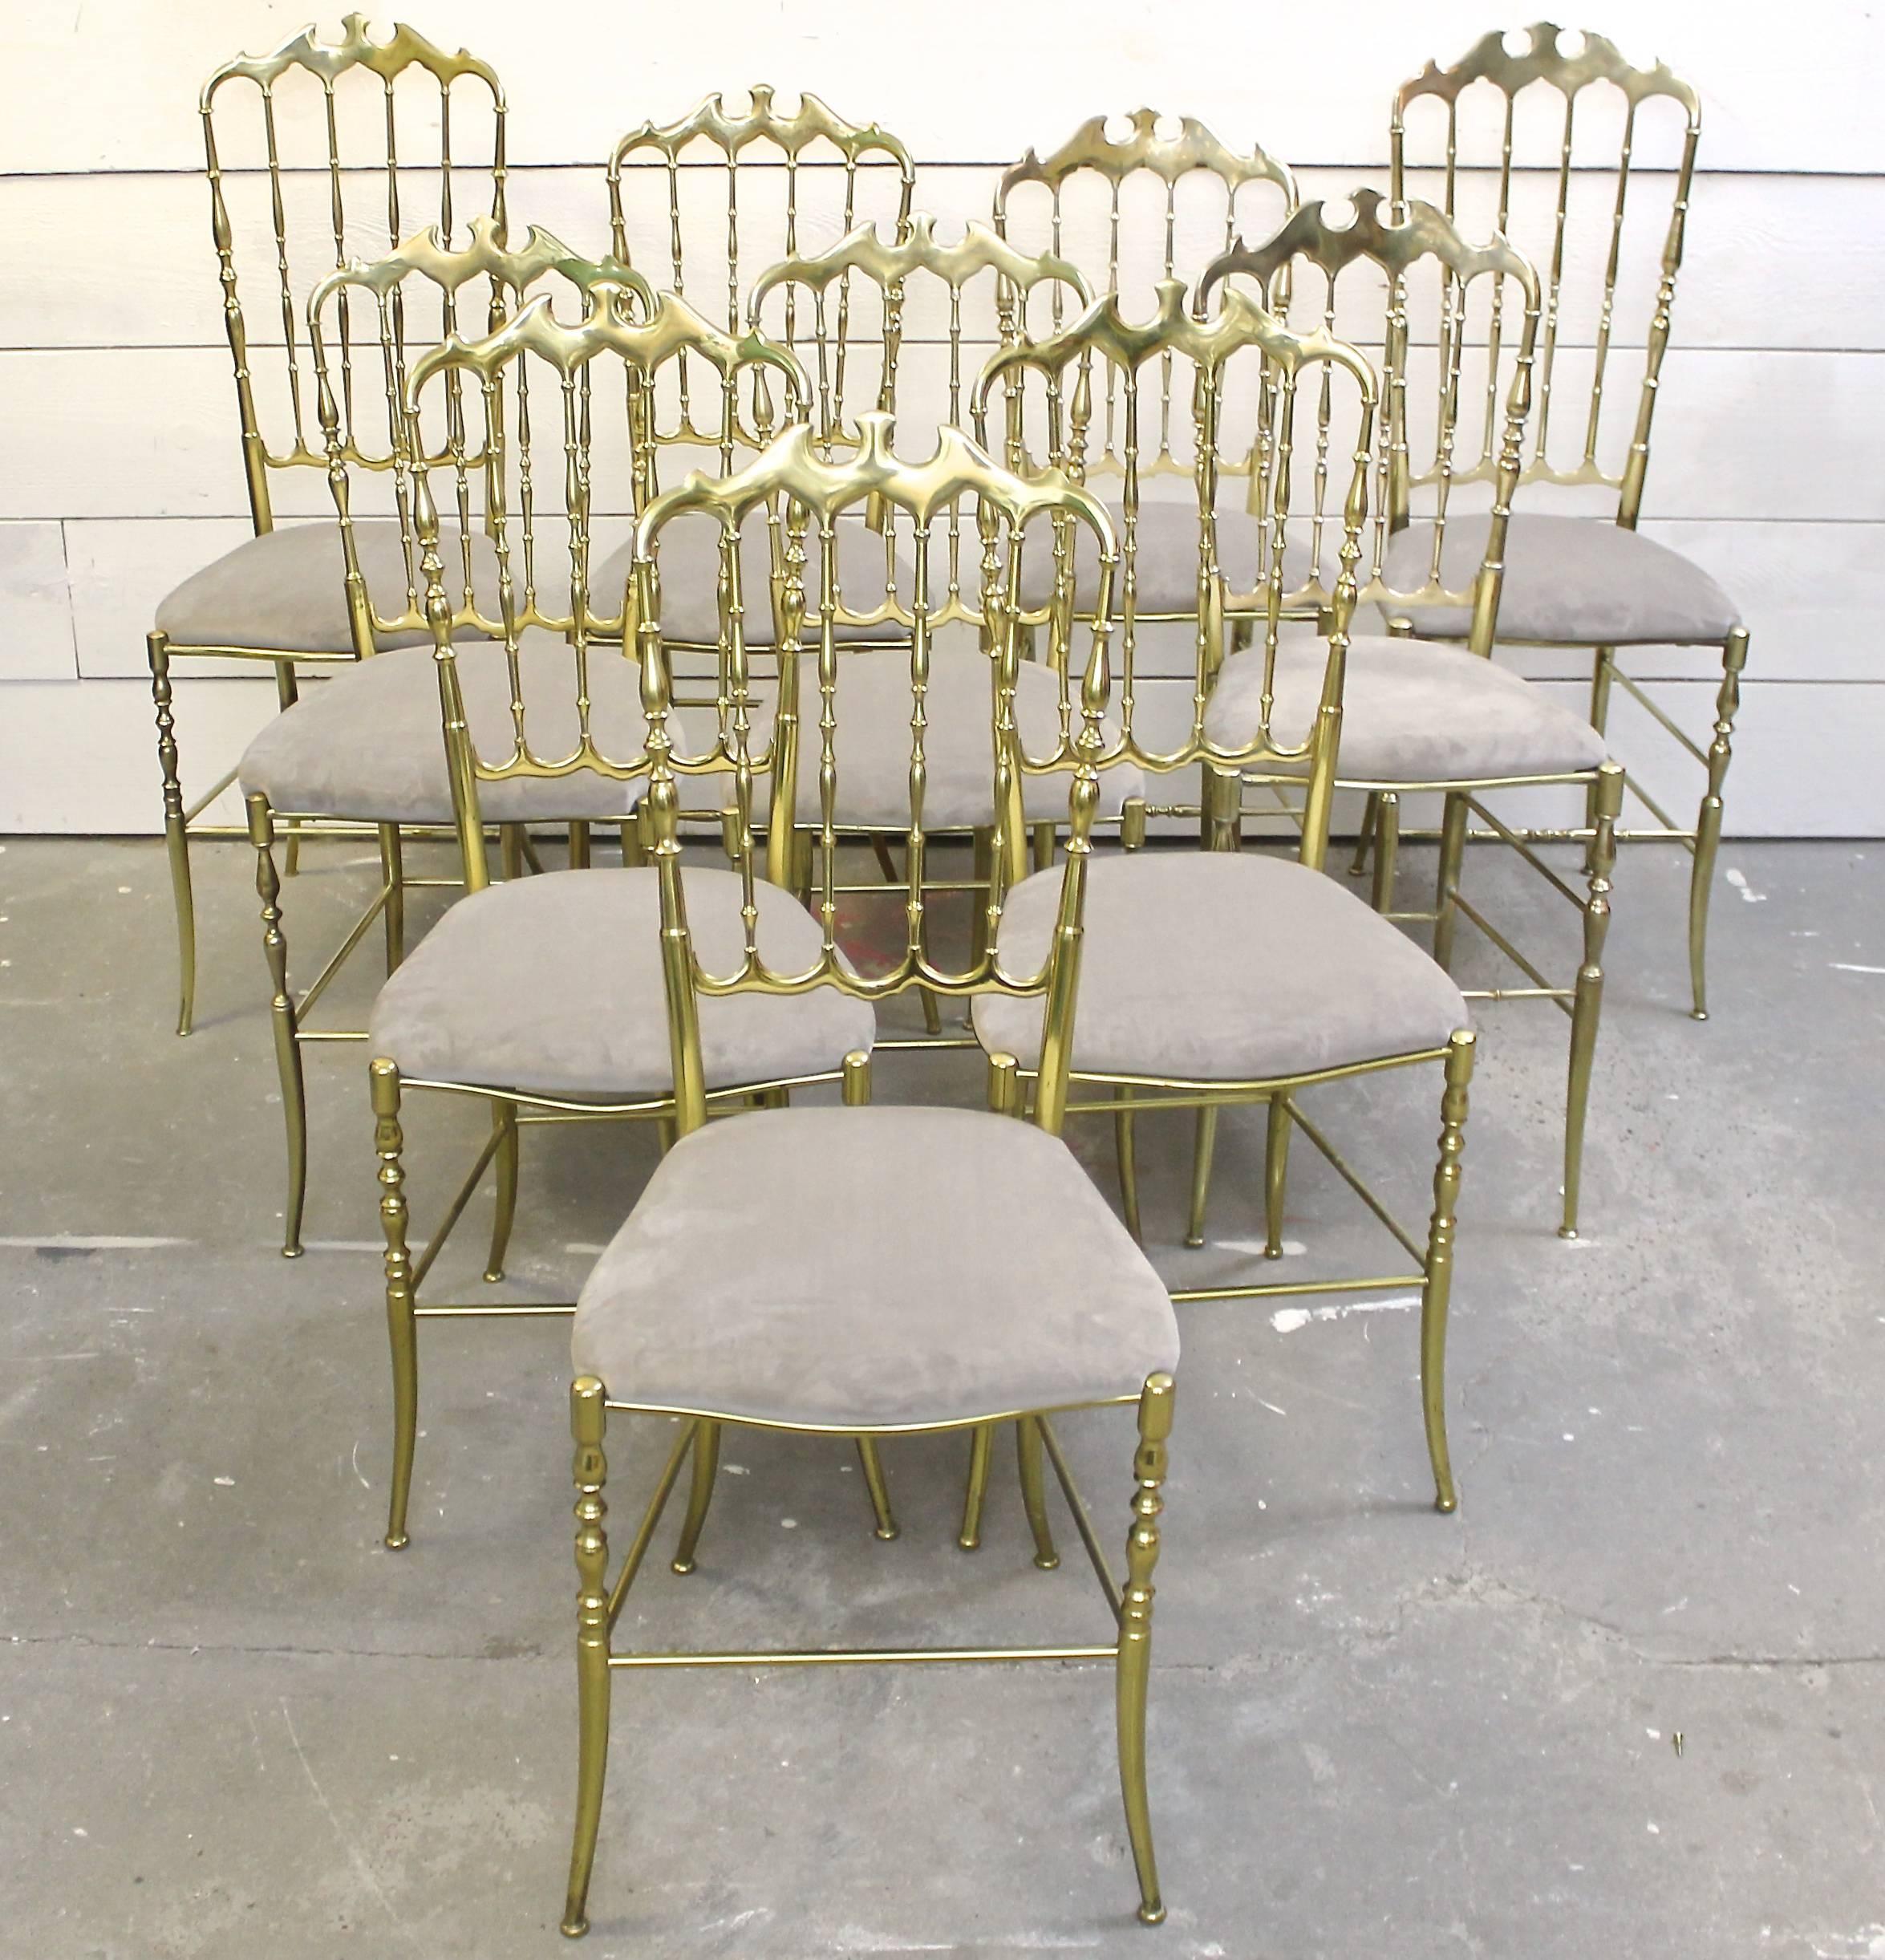 Vintage, gilt solid brass, set of Chiavari chairs with purple velvet upholstery, circa 1950.
Originally designed by Giuseppe Gaetano Descalzi and produced since the early 19th century in the town of Chiavari, Italy.